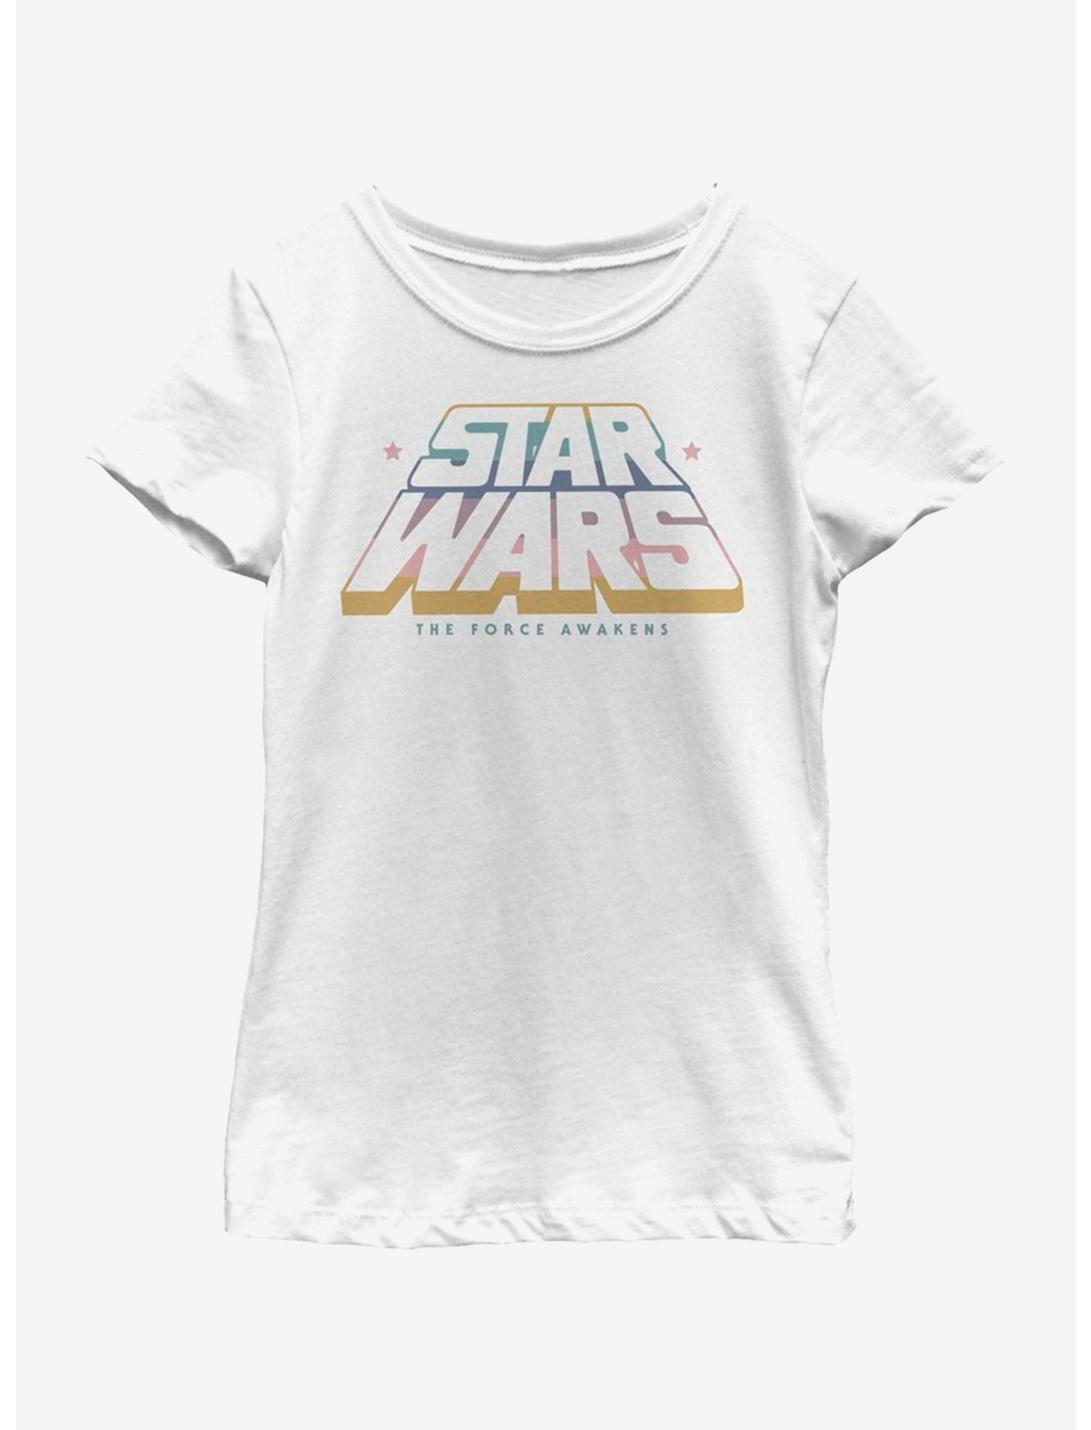 Star Wars Episode VII The Force Awakens Gradient Youth Girls T-Shirt, WHITE, hi-res